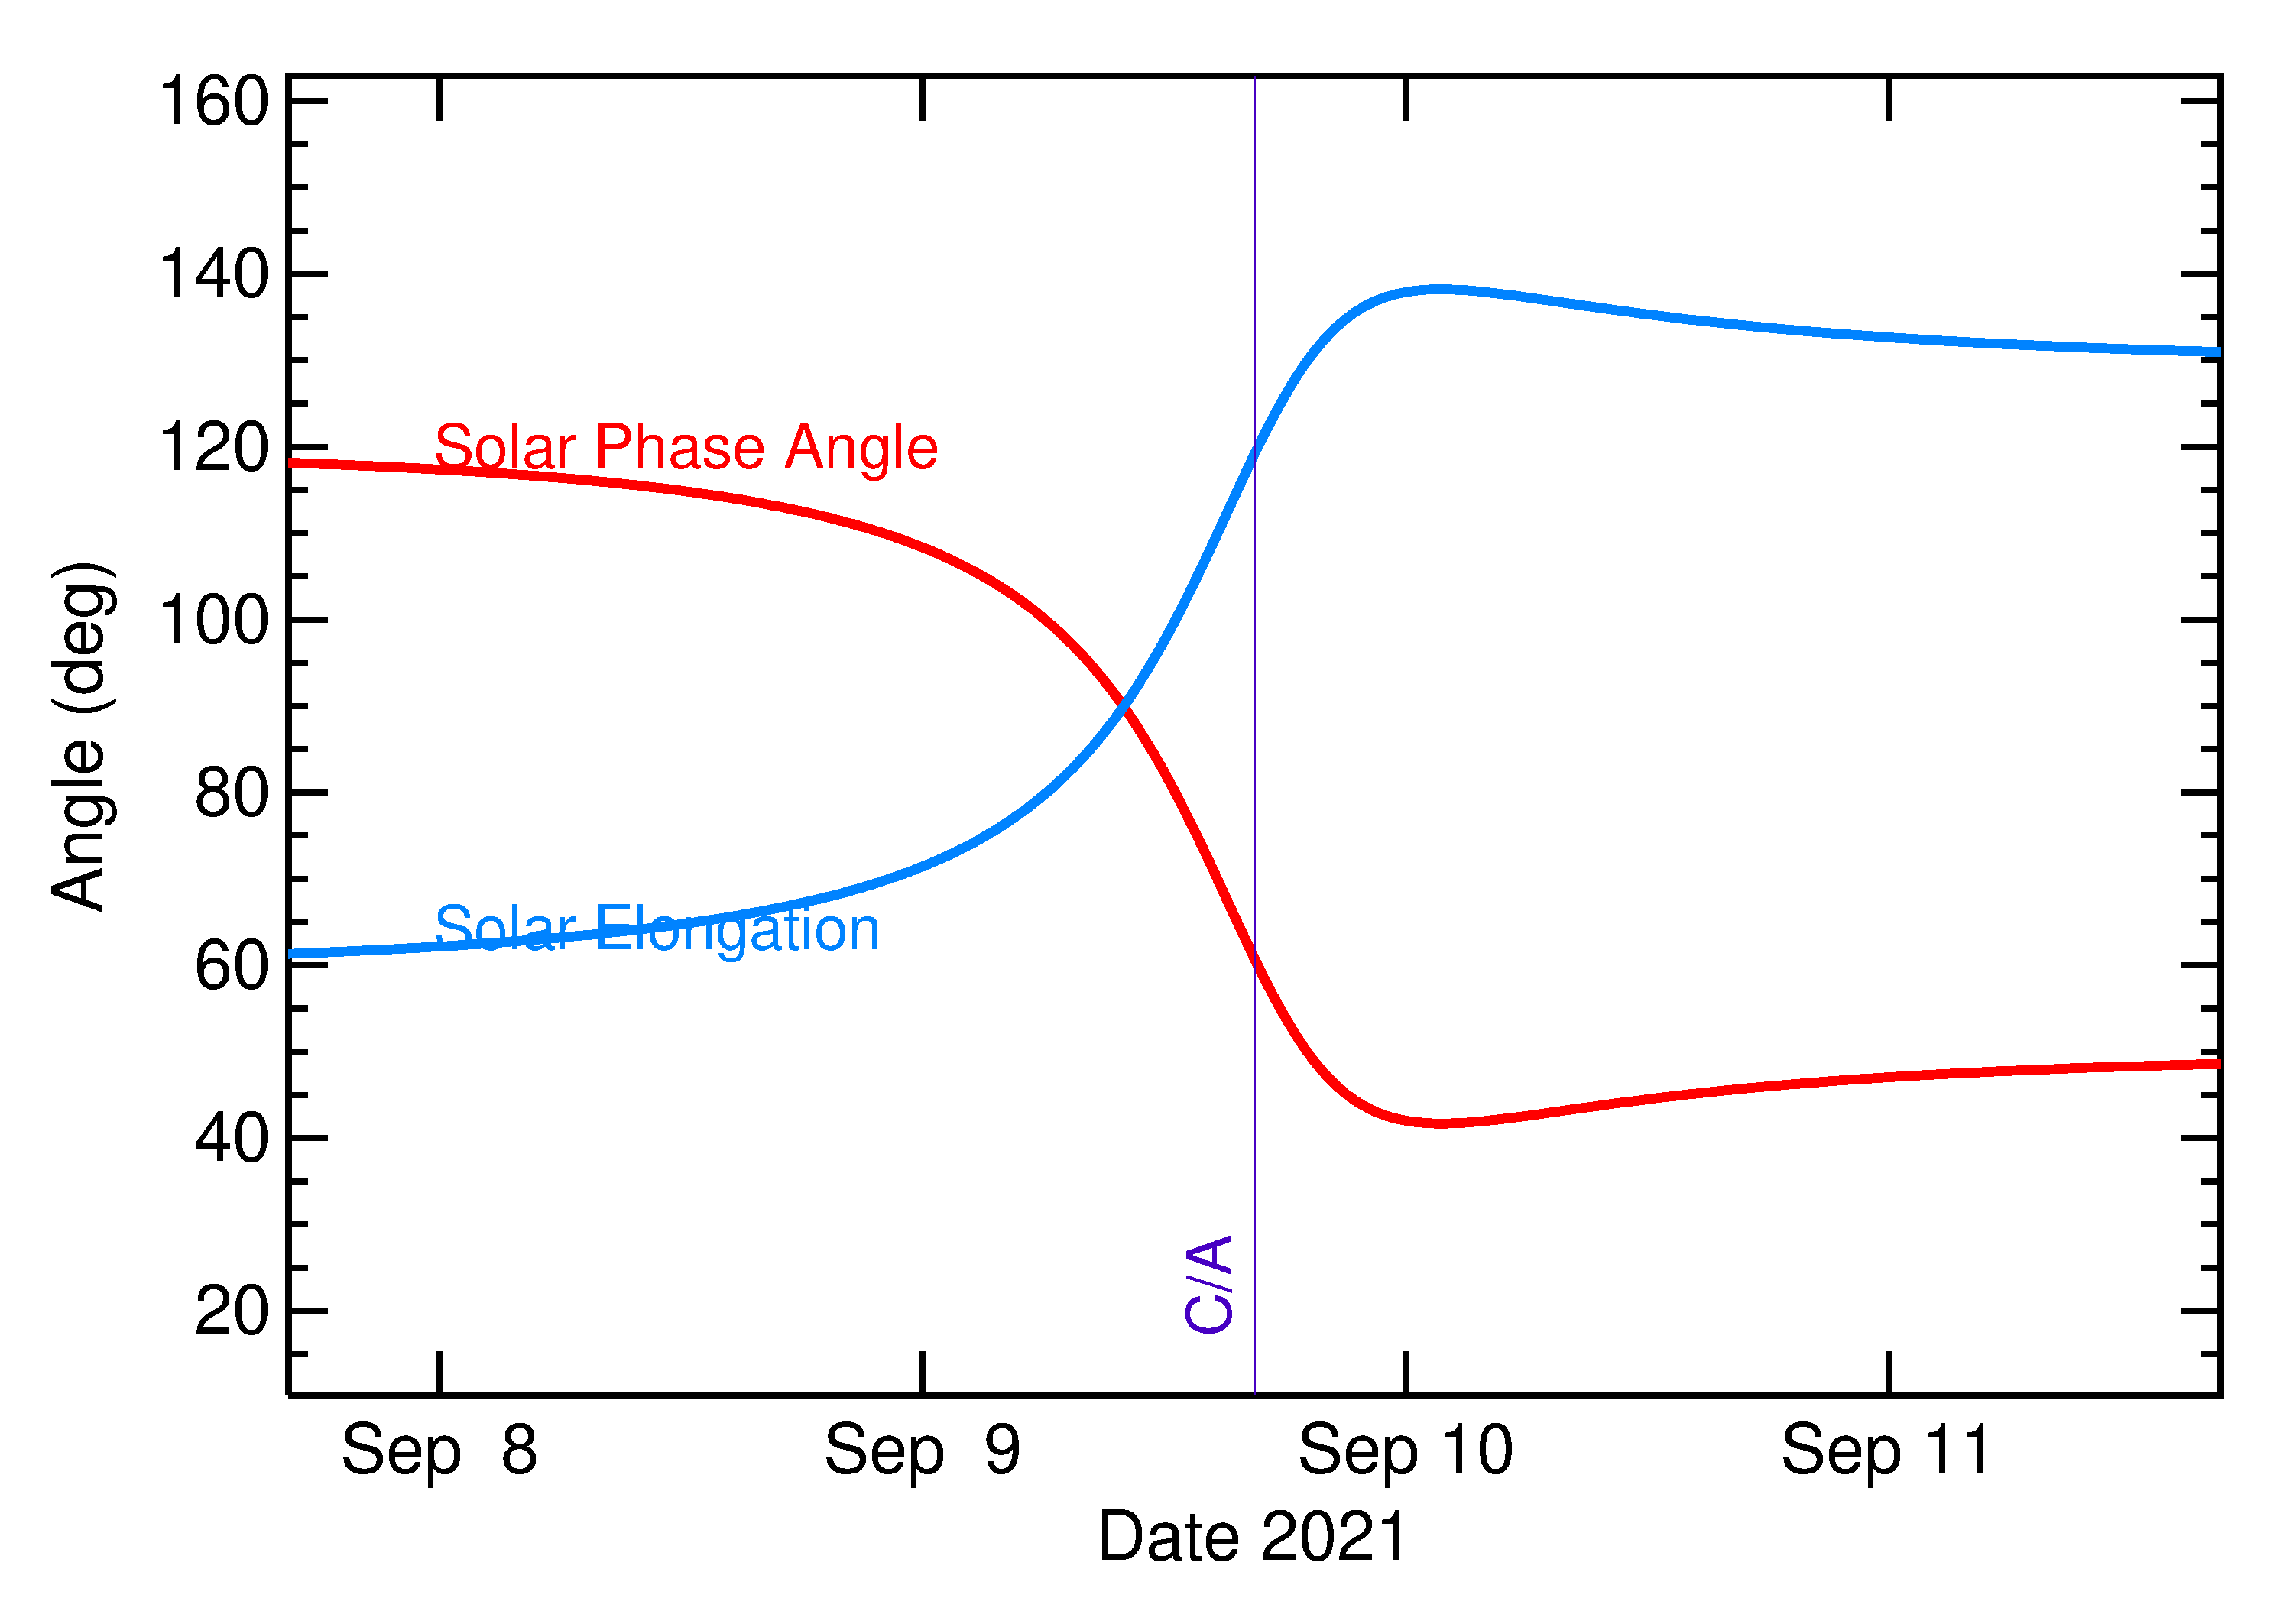 Solar Elongation and Solar Phase Angle of 2021 RB6 in the days around closest approach